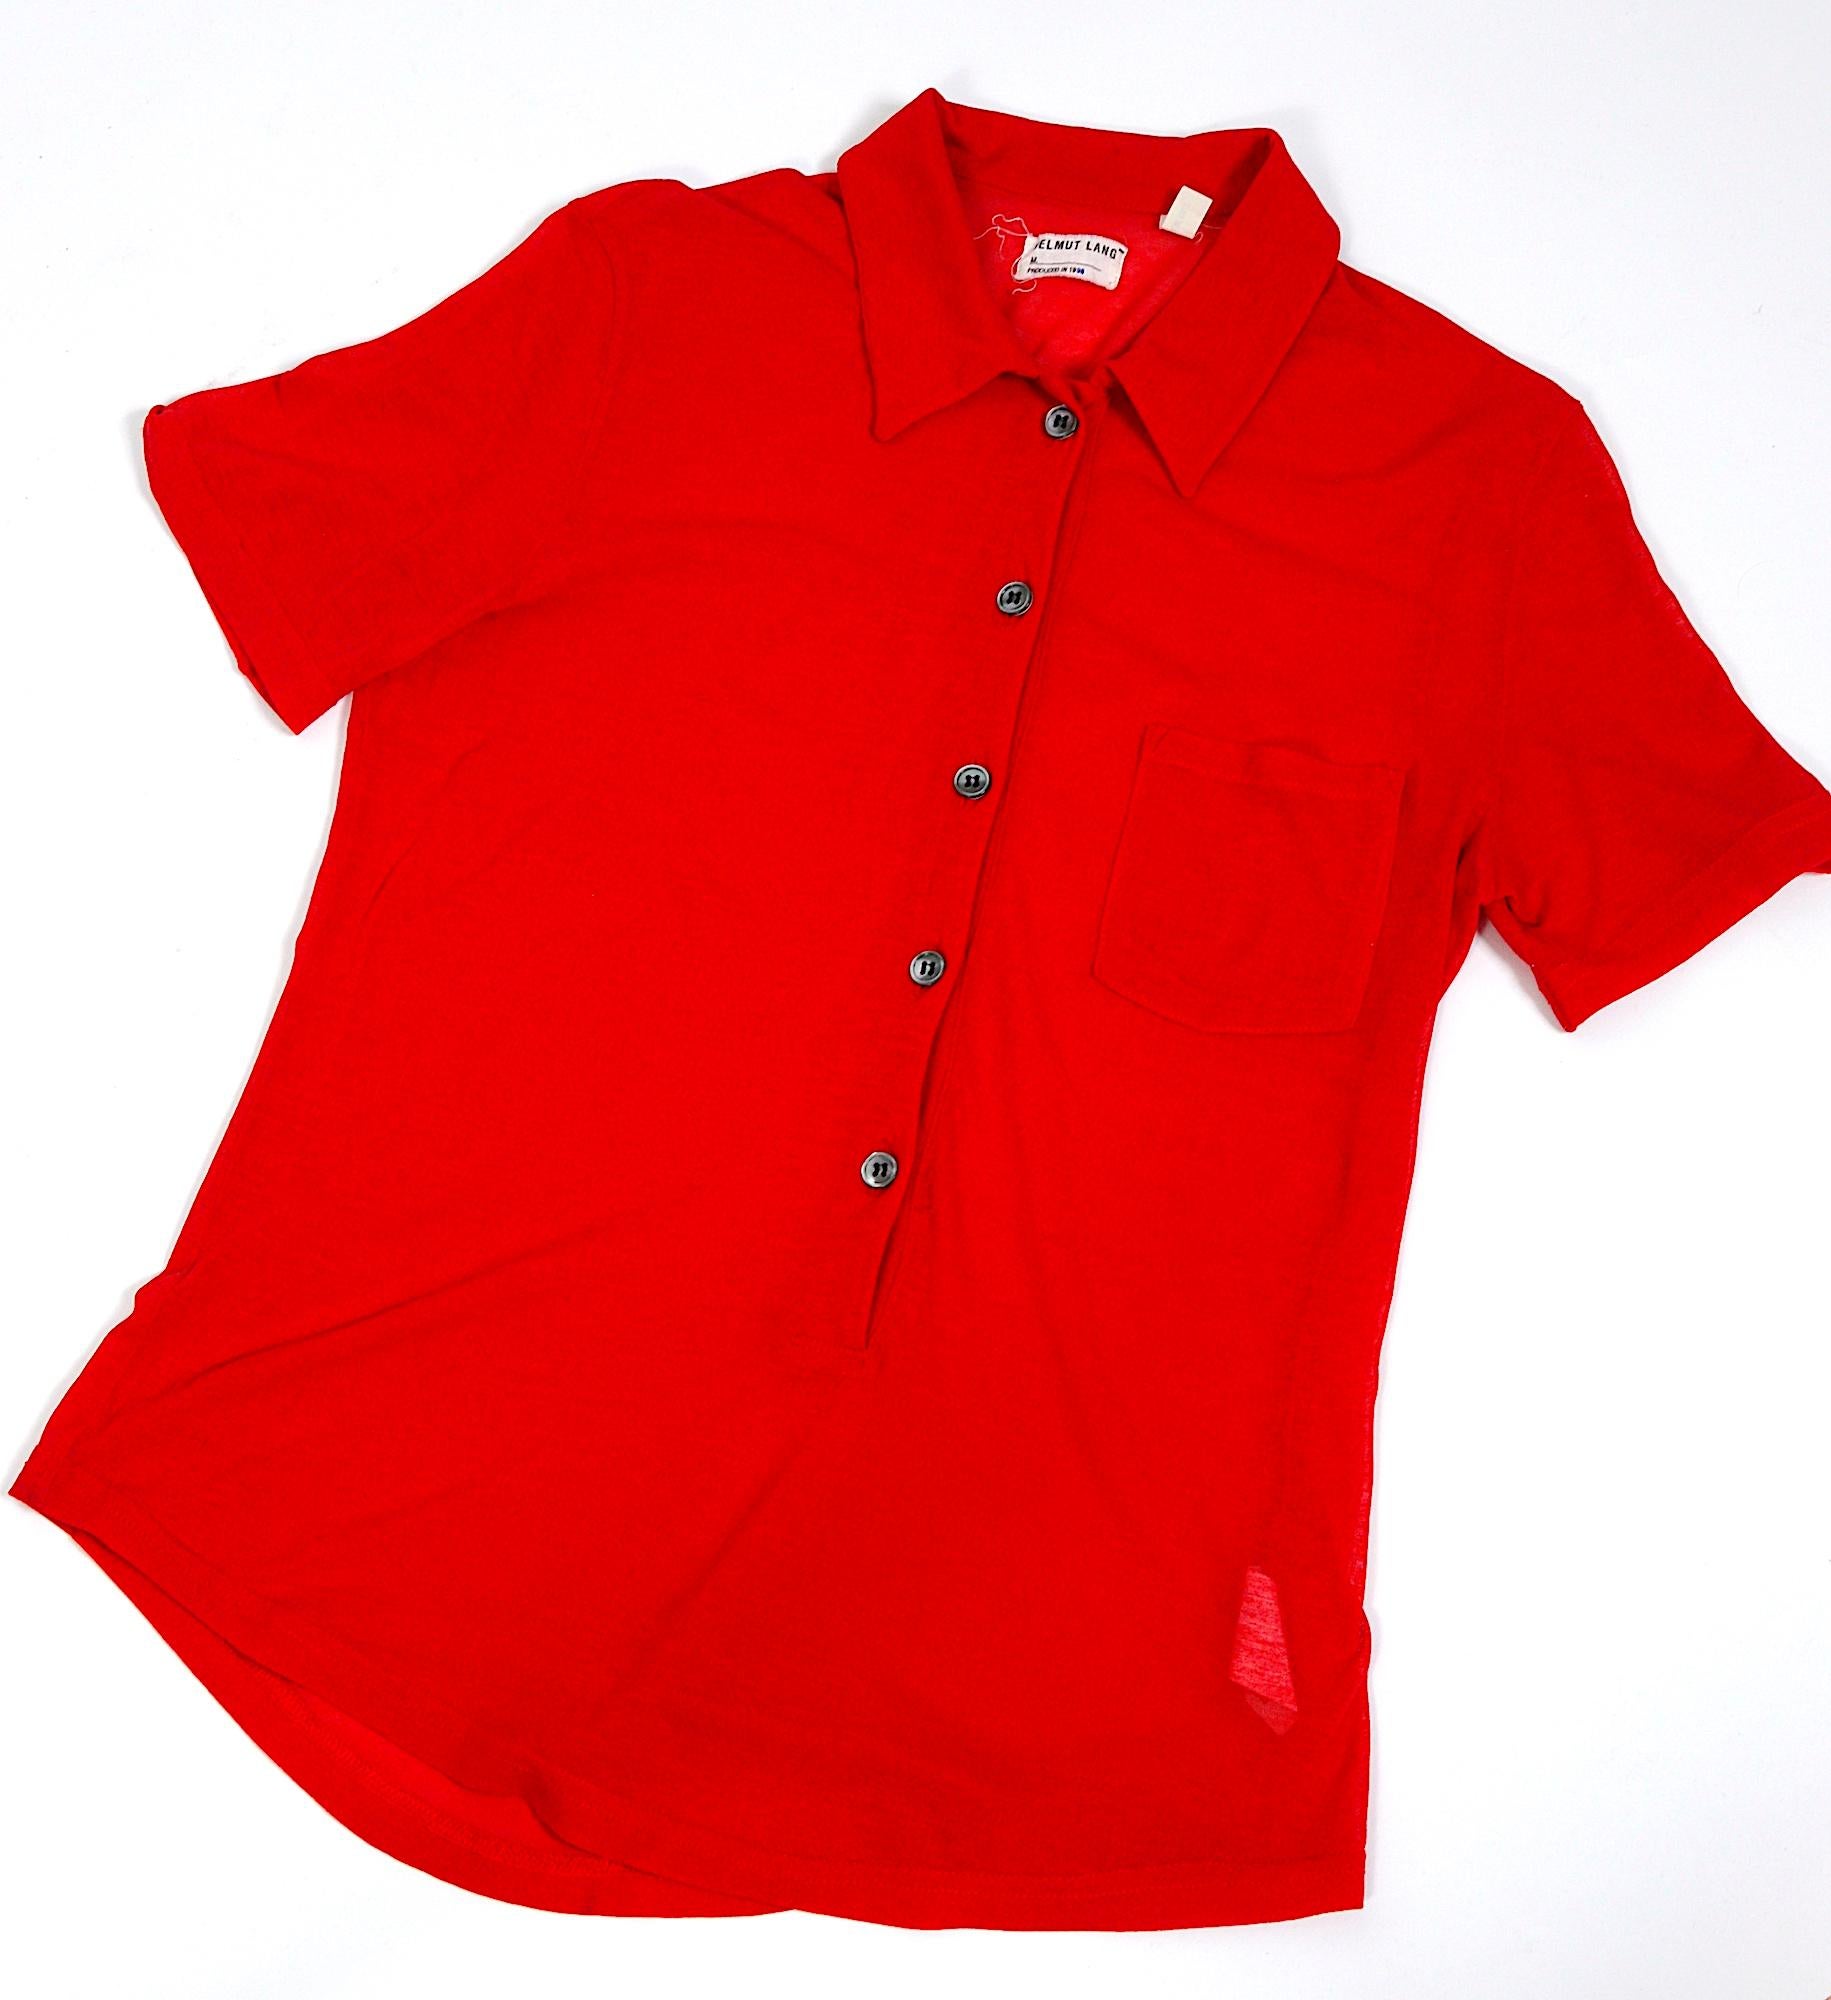 Archive collectors vintage 1998 by Helmut Lang red cotton-jersey top.
Size XS - in excellent condition. 
Use the measurements that are taken flat for the perfect fit.
Sh to Sh 15inch/38cm - Ua to Ua 17inch/43cm(x2) - Waist 15inch/38cm(x2) - total